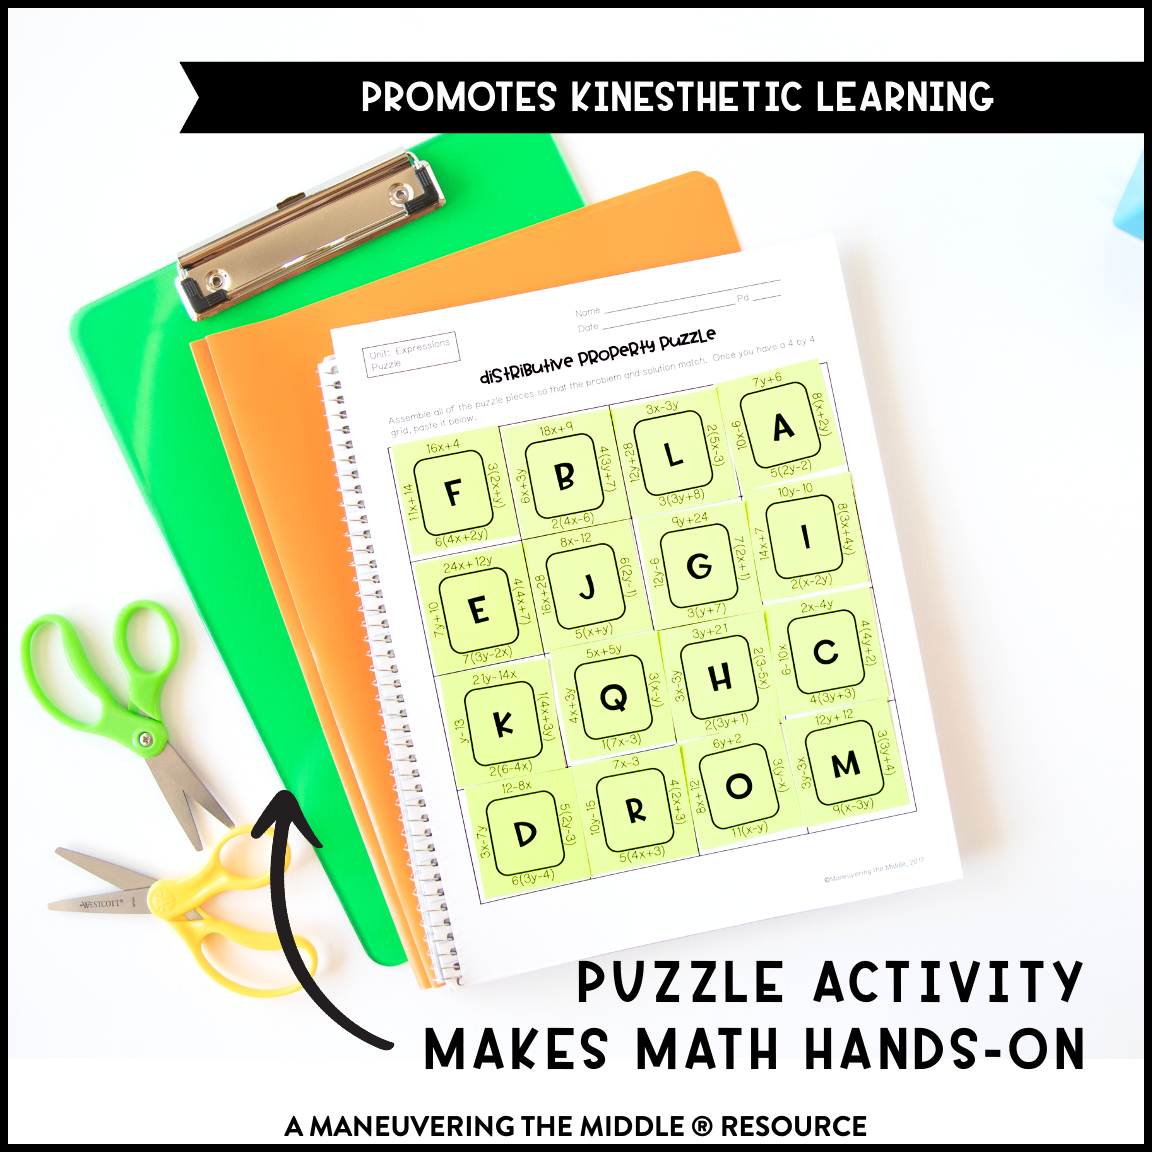 6th Grade Expressions Activity Bundle with 9 hands-on activities (including Order of Operations and Distributive Property) for 6th Grade math students!